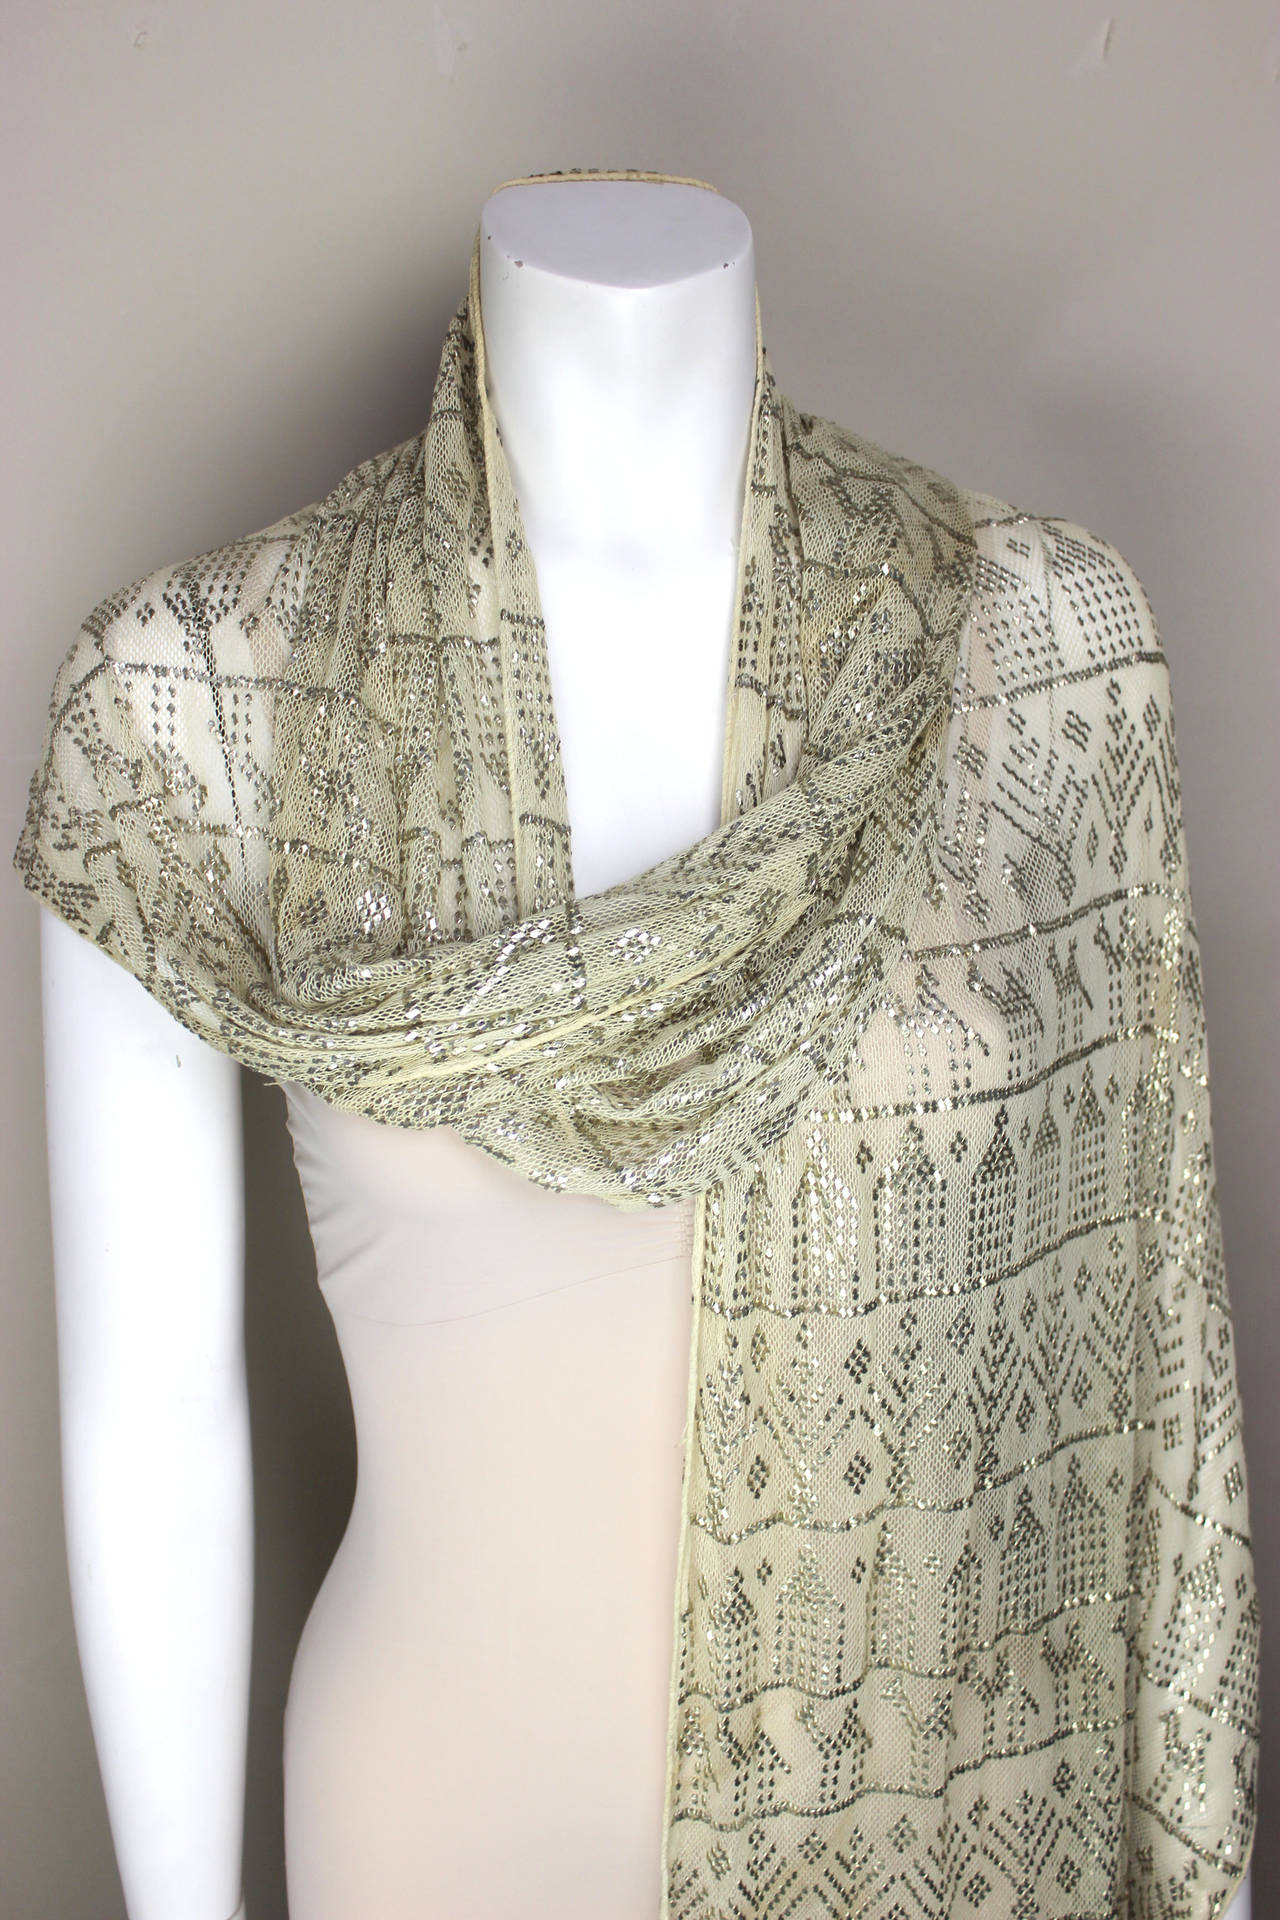 In the 1920's, Tutankhamun's tomb was discovered, sparking an interest in all things Egyptian. Metal embroidery dates back to Ancient Egypt. The flat stripes of metal are worked into a mesh fabric in various designs. This scarf is a warm creme color